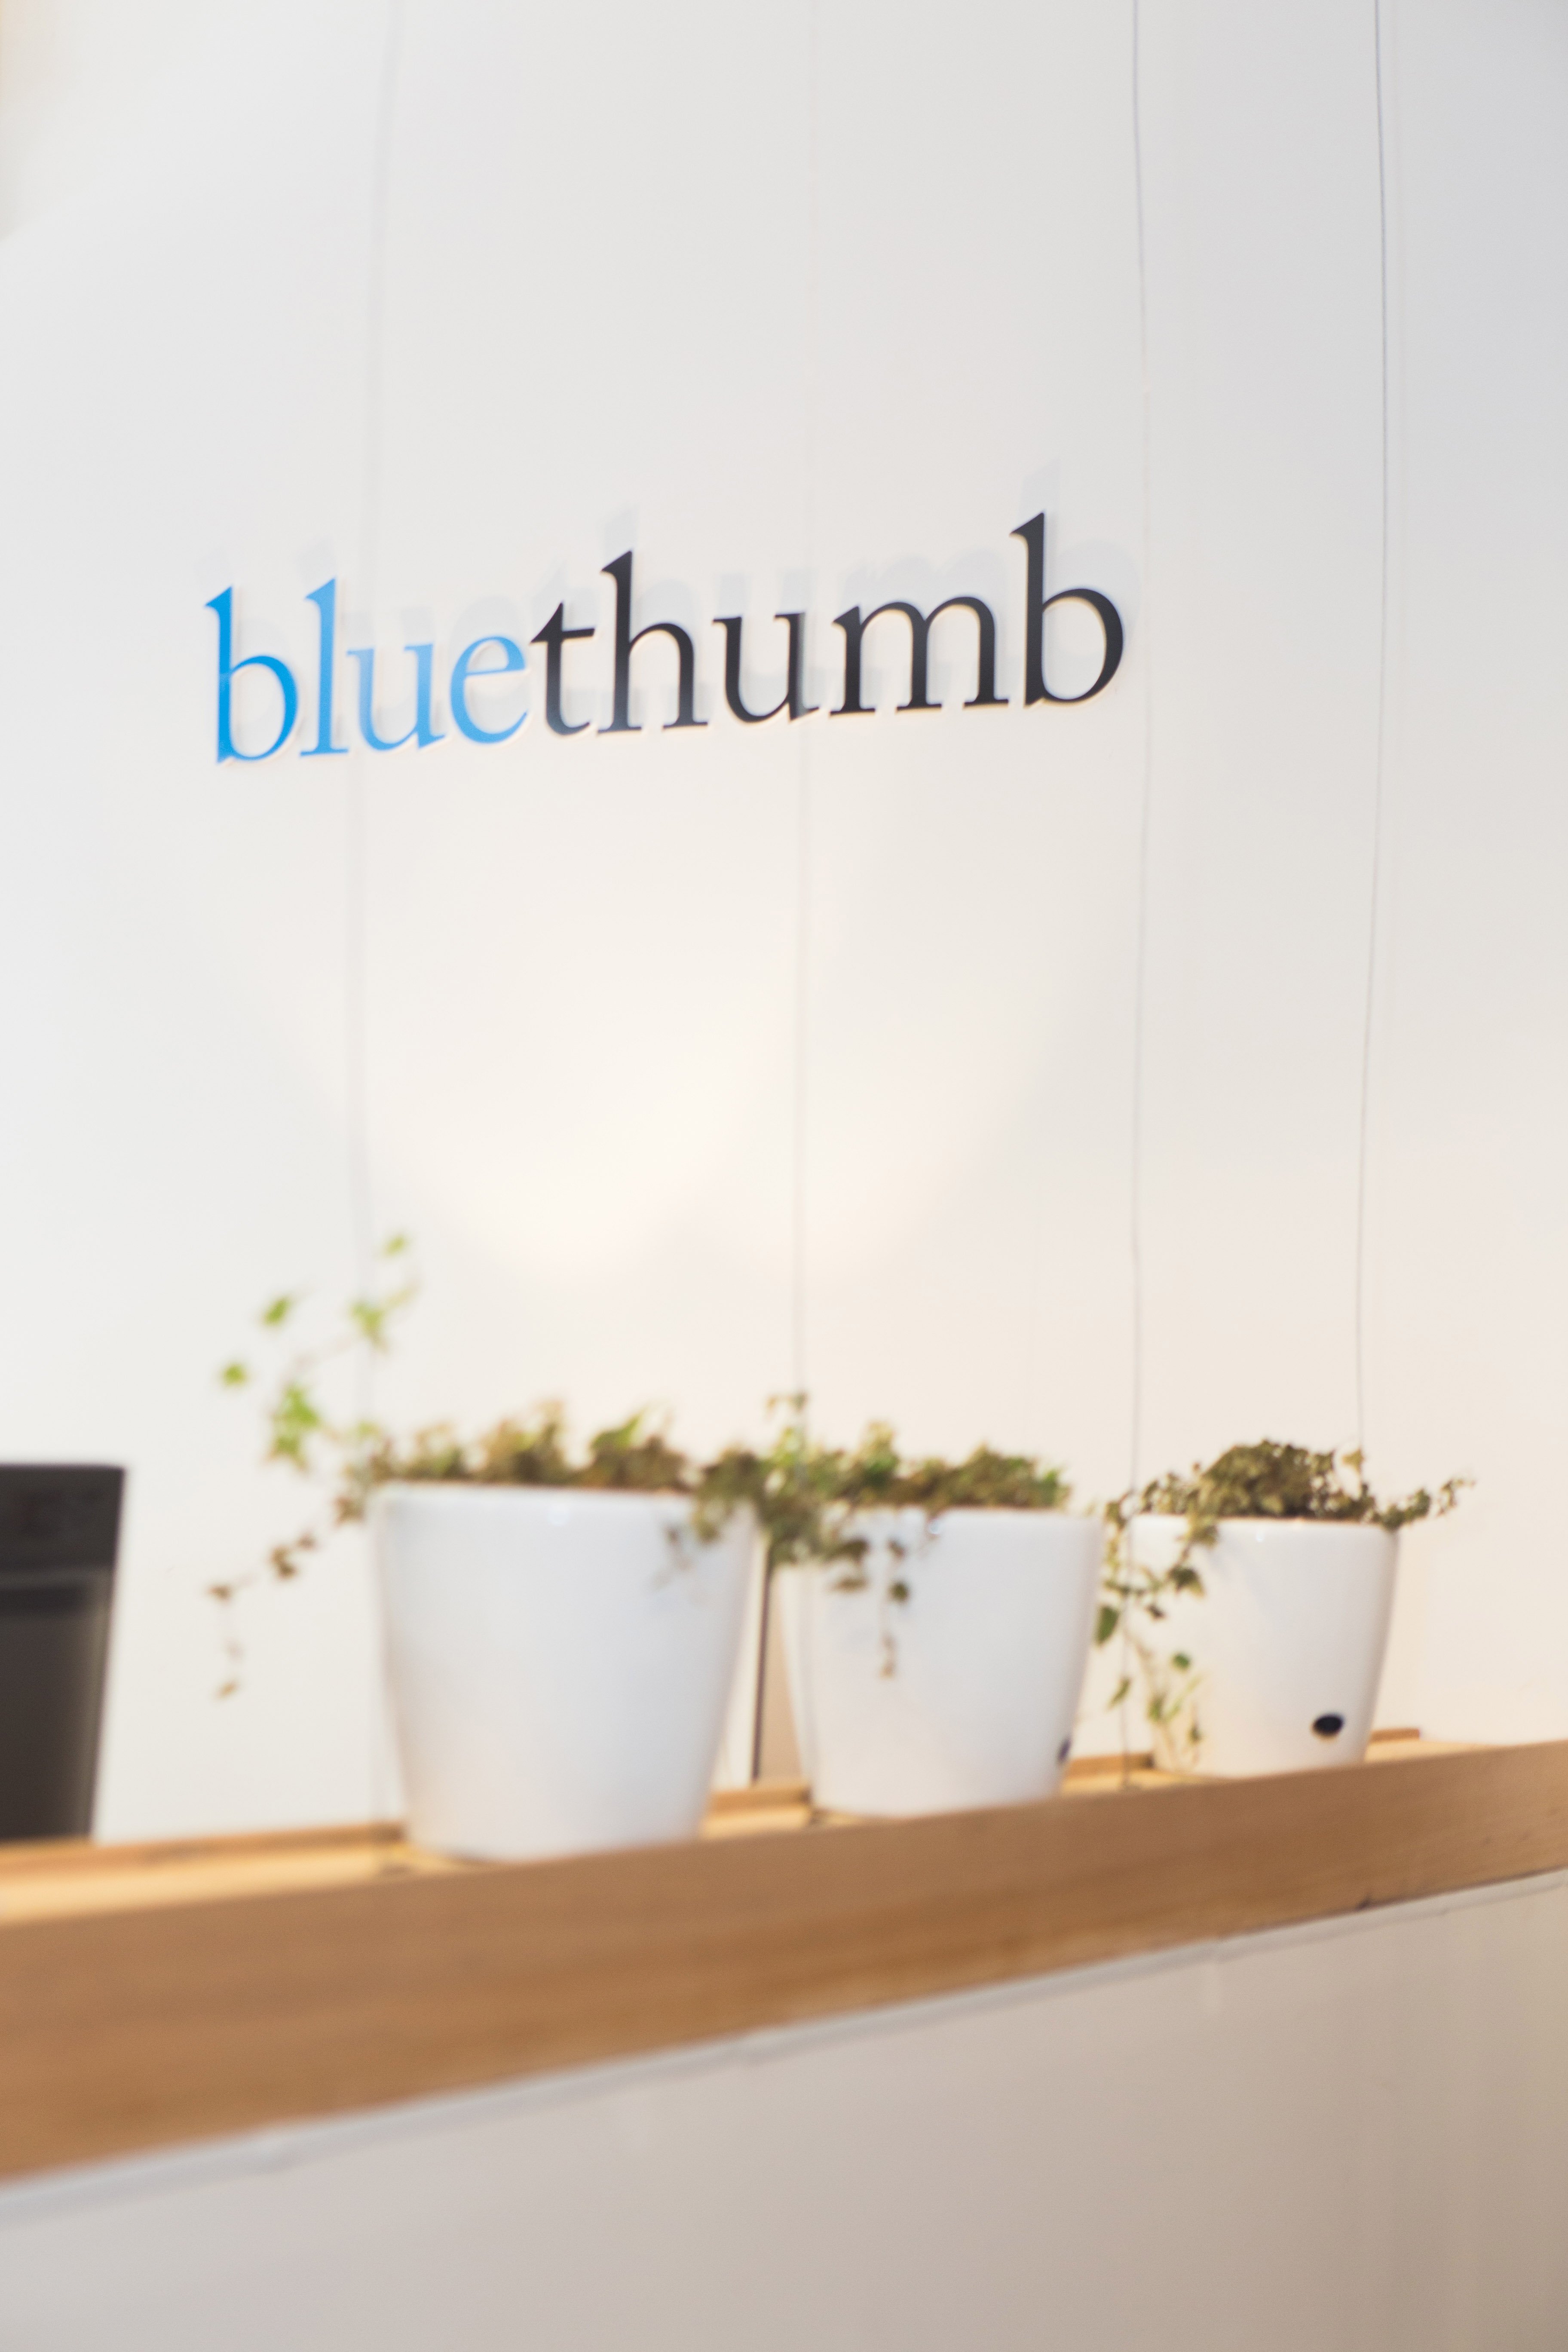 bluethumb HQ - our new office in Collingwood